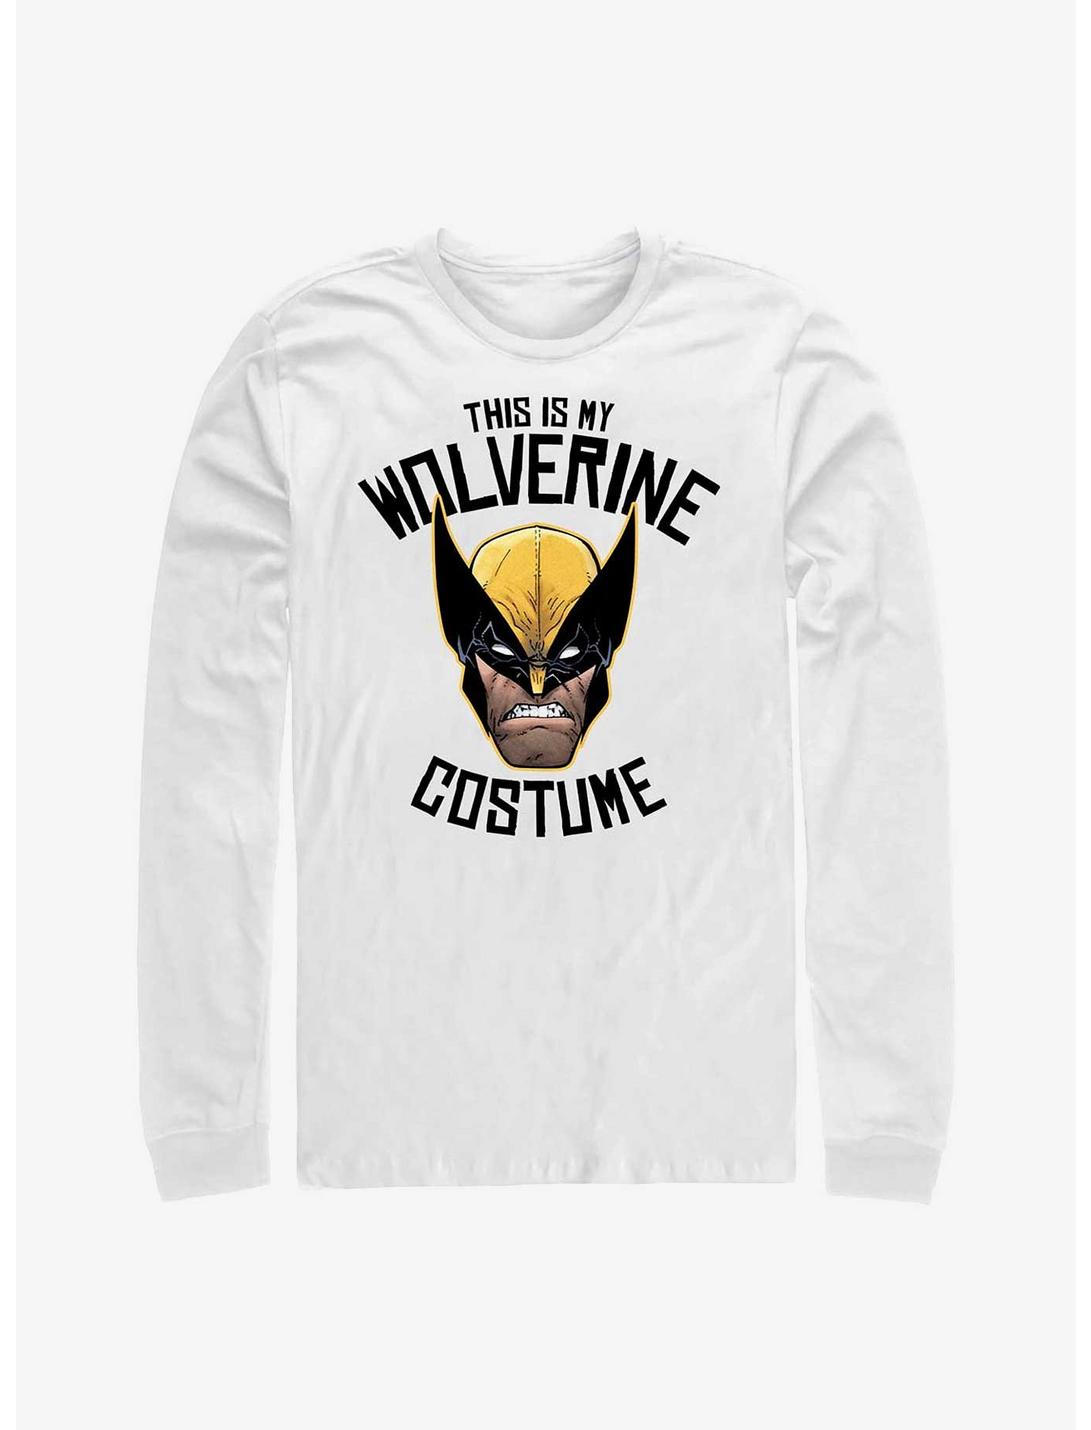 Marvel Wolverine Is Costume Long-Sleeve T-Shirt, WHITE, hi-res